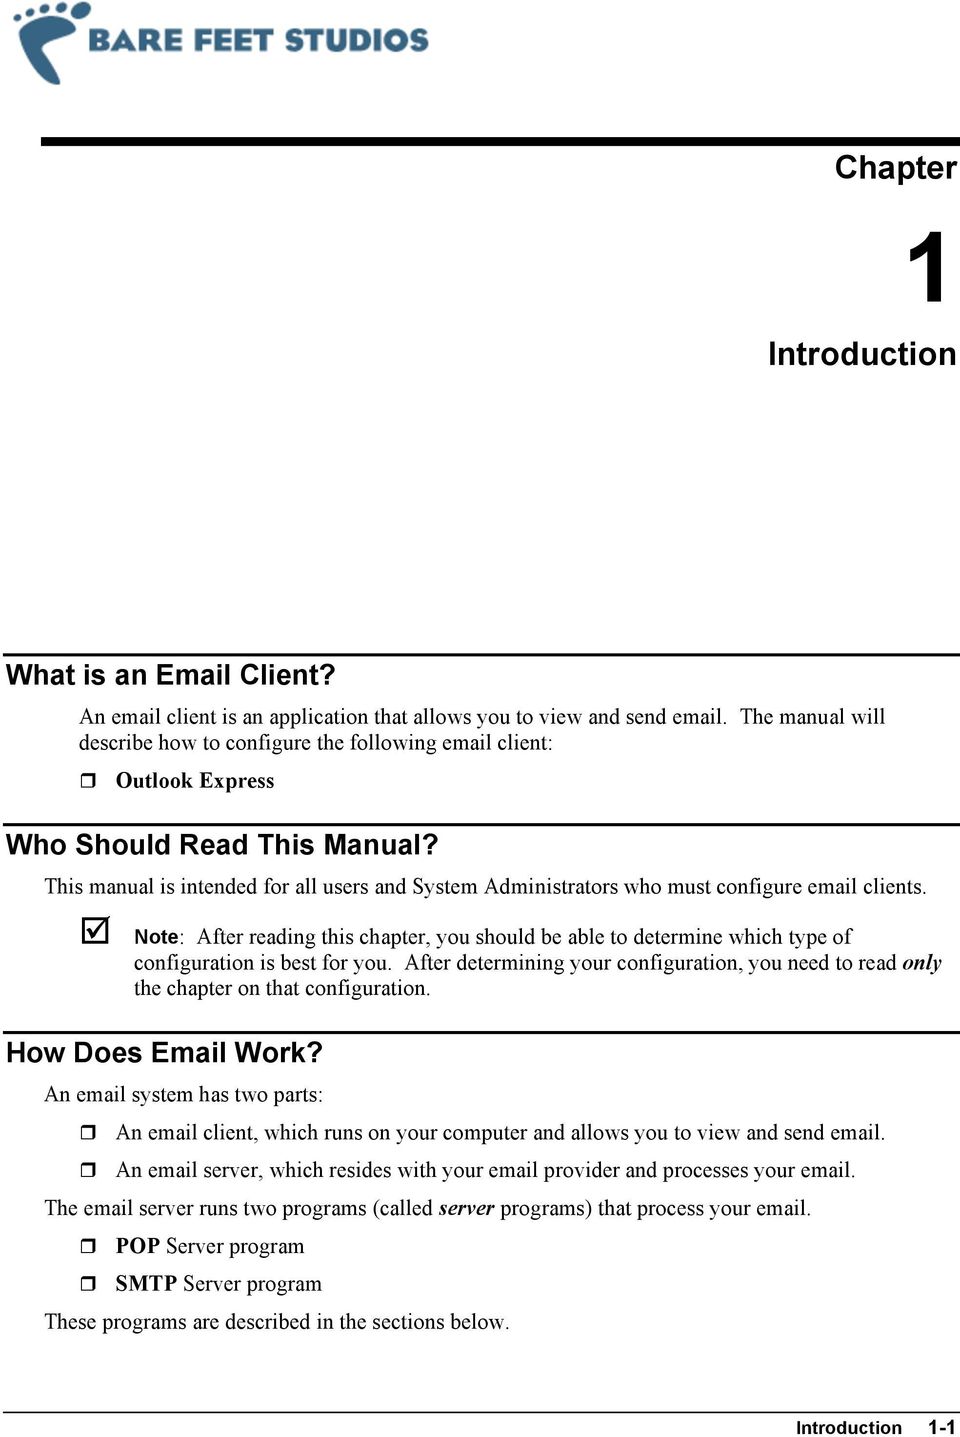 This manual is intended for all users and System Administrators who must configure email clients.